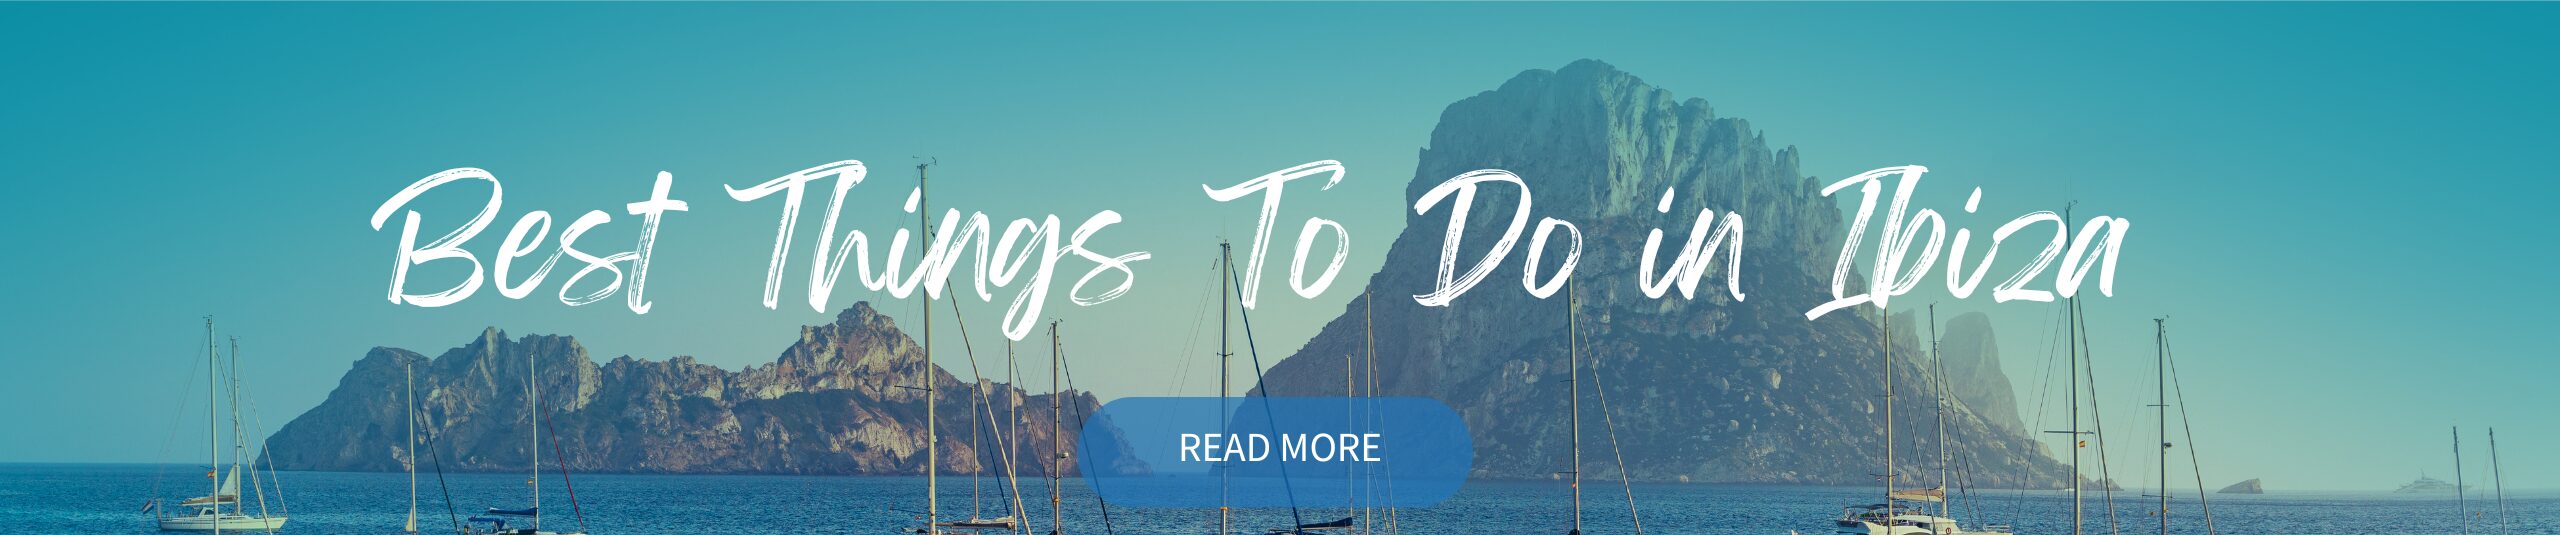 best things to do in ibiza_the villa agency blog